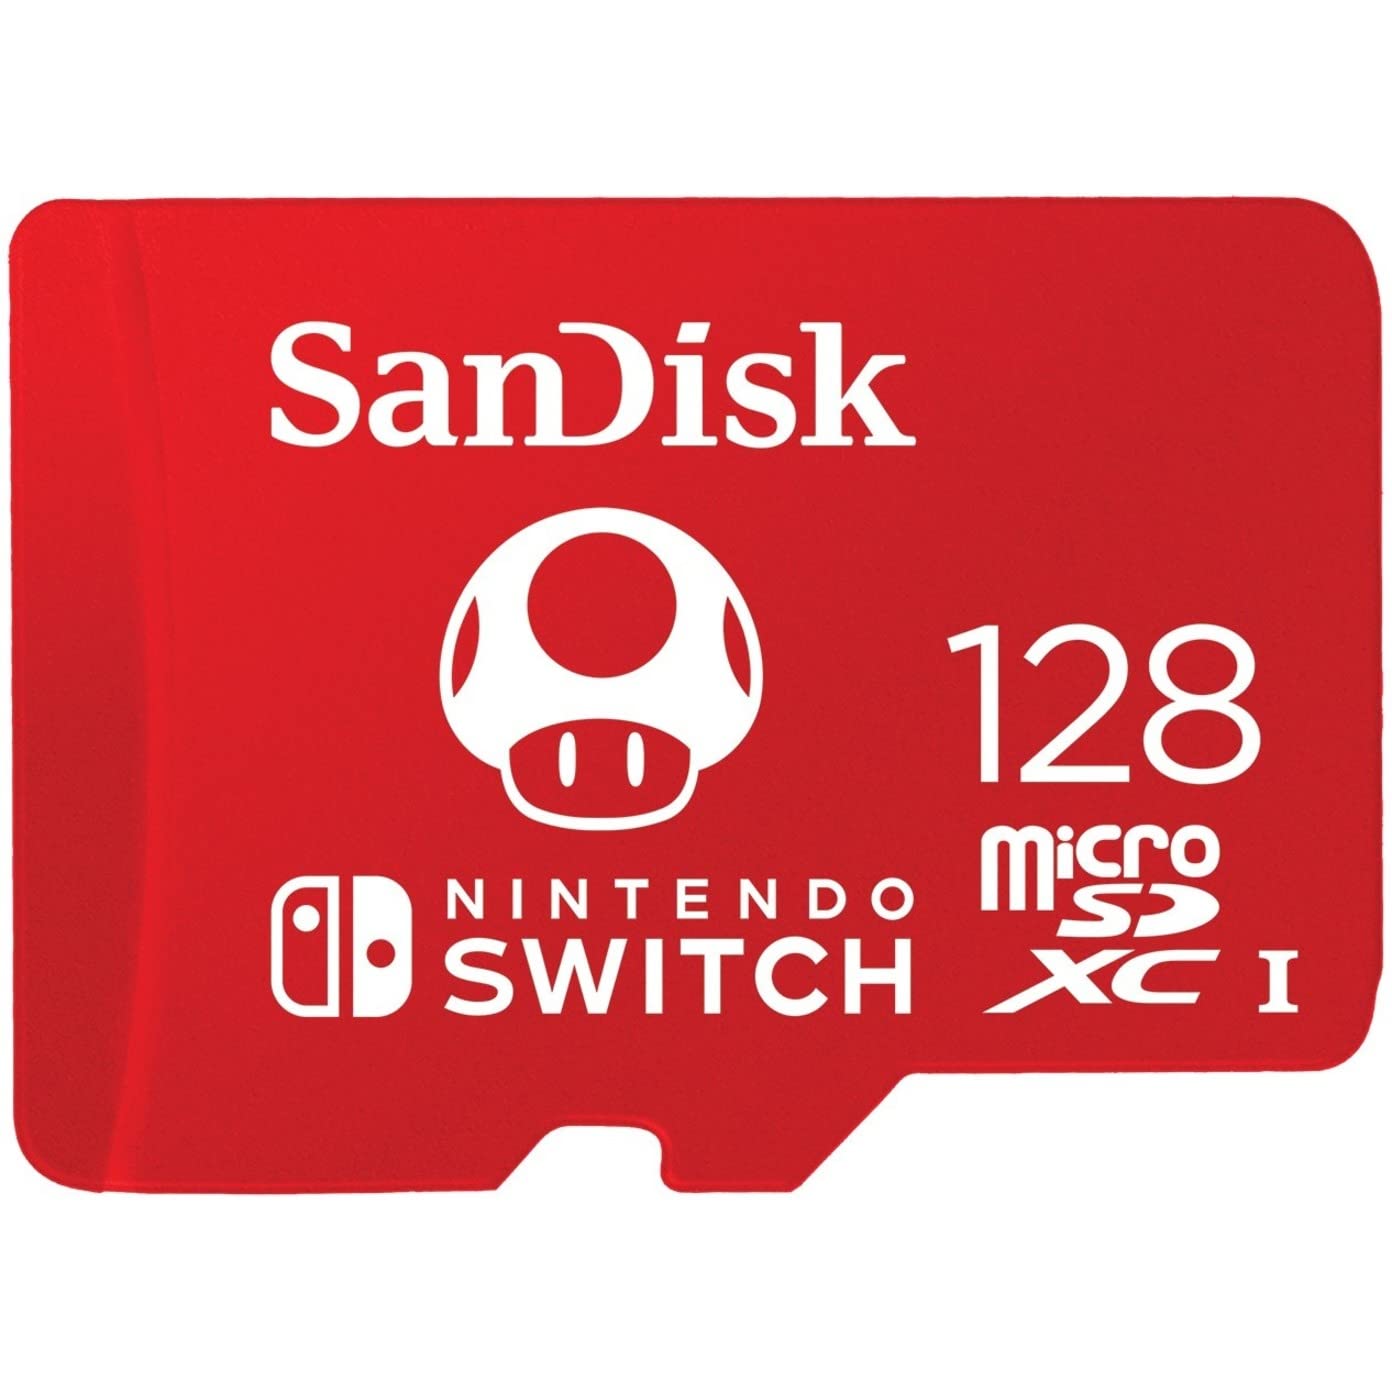 128GB SanDisk microSDXC Memory Card for Nintendo Switch $13.55 + Free Shipping w/ Prime or on $35+